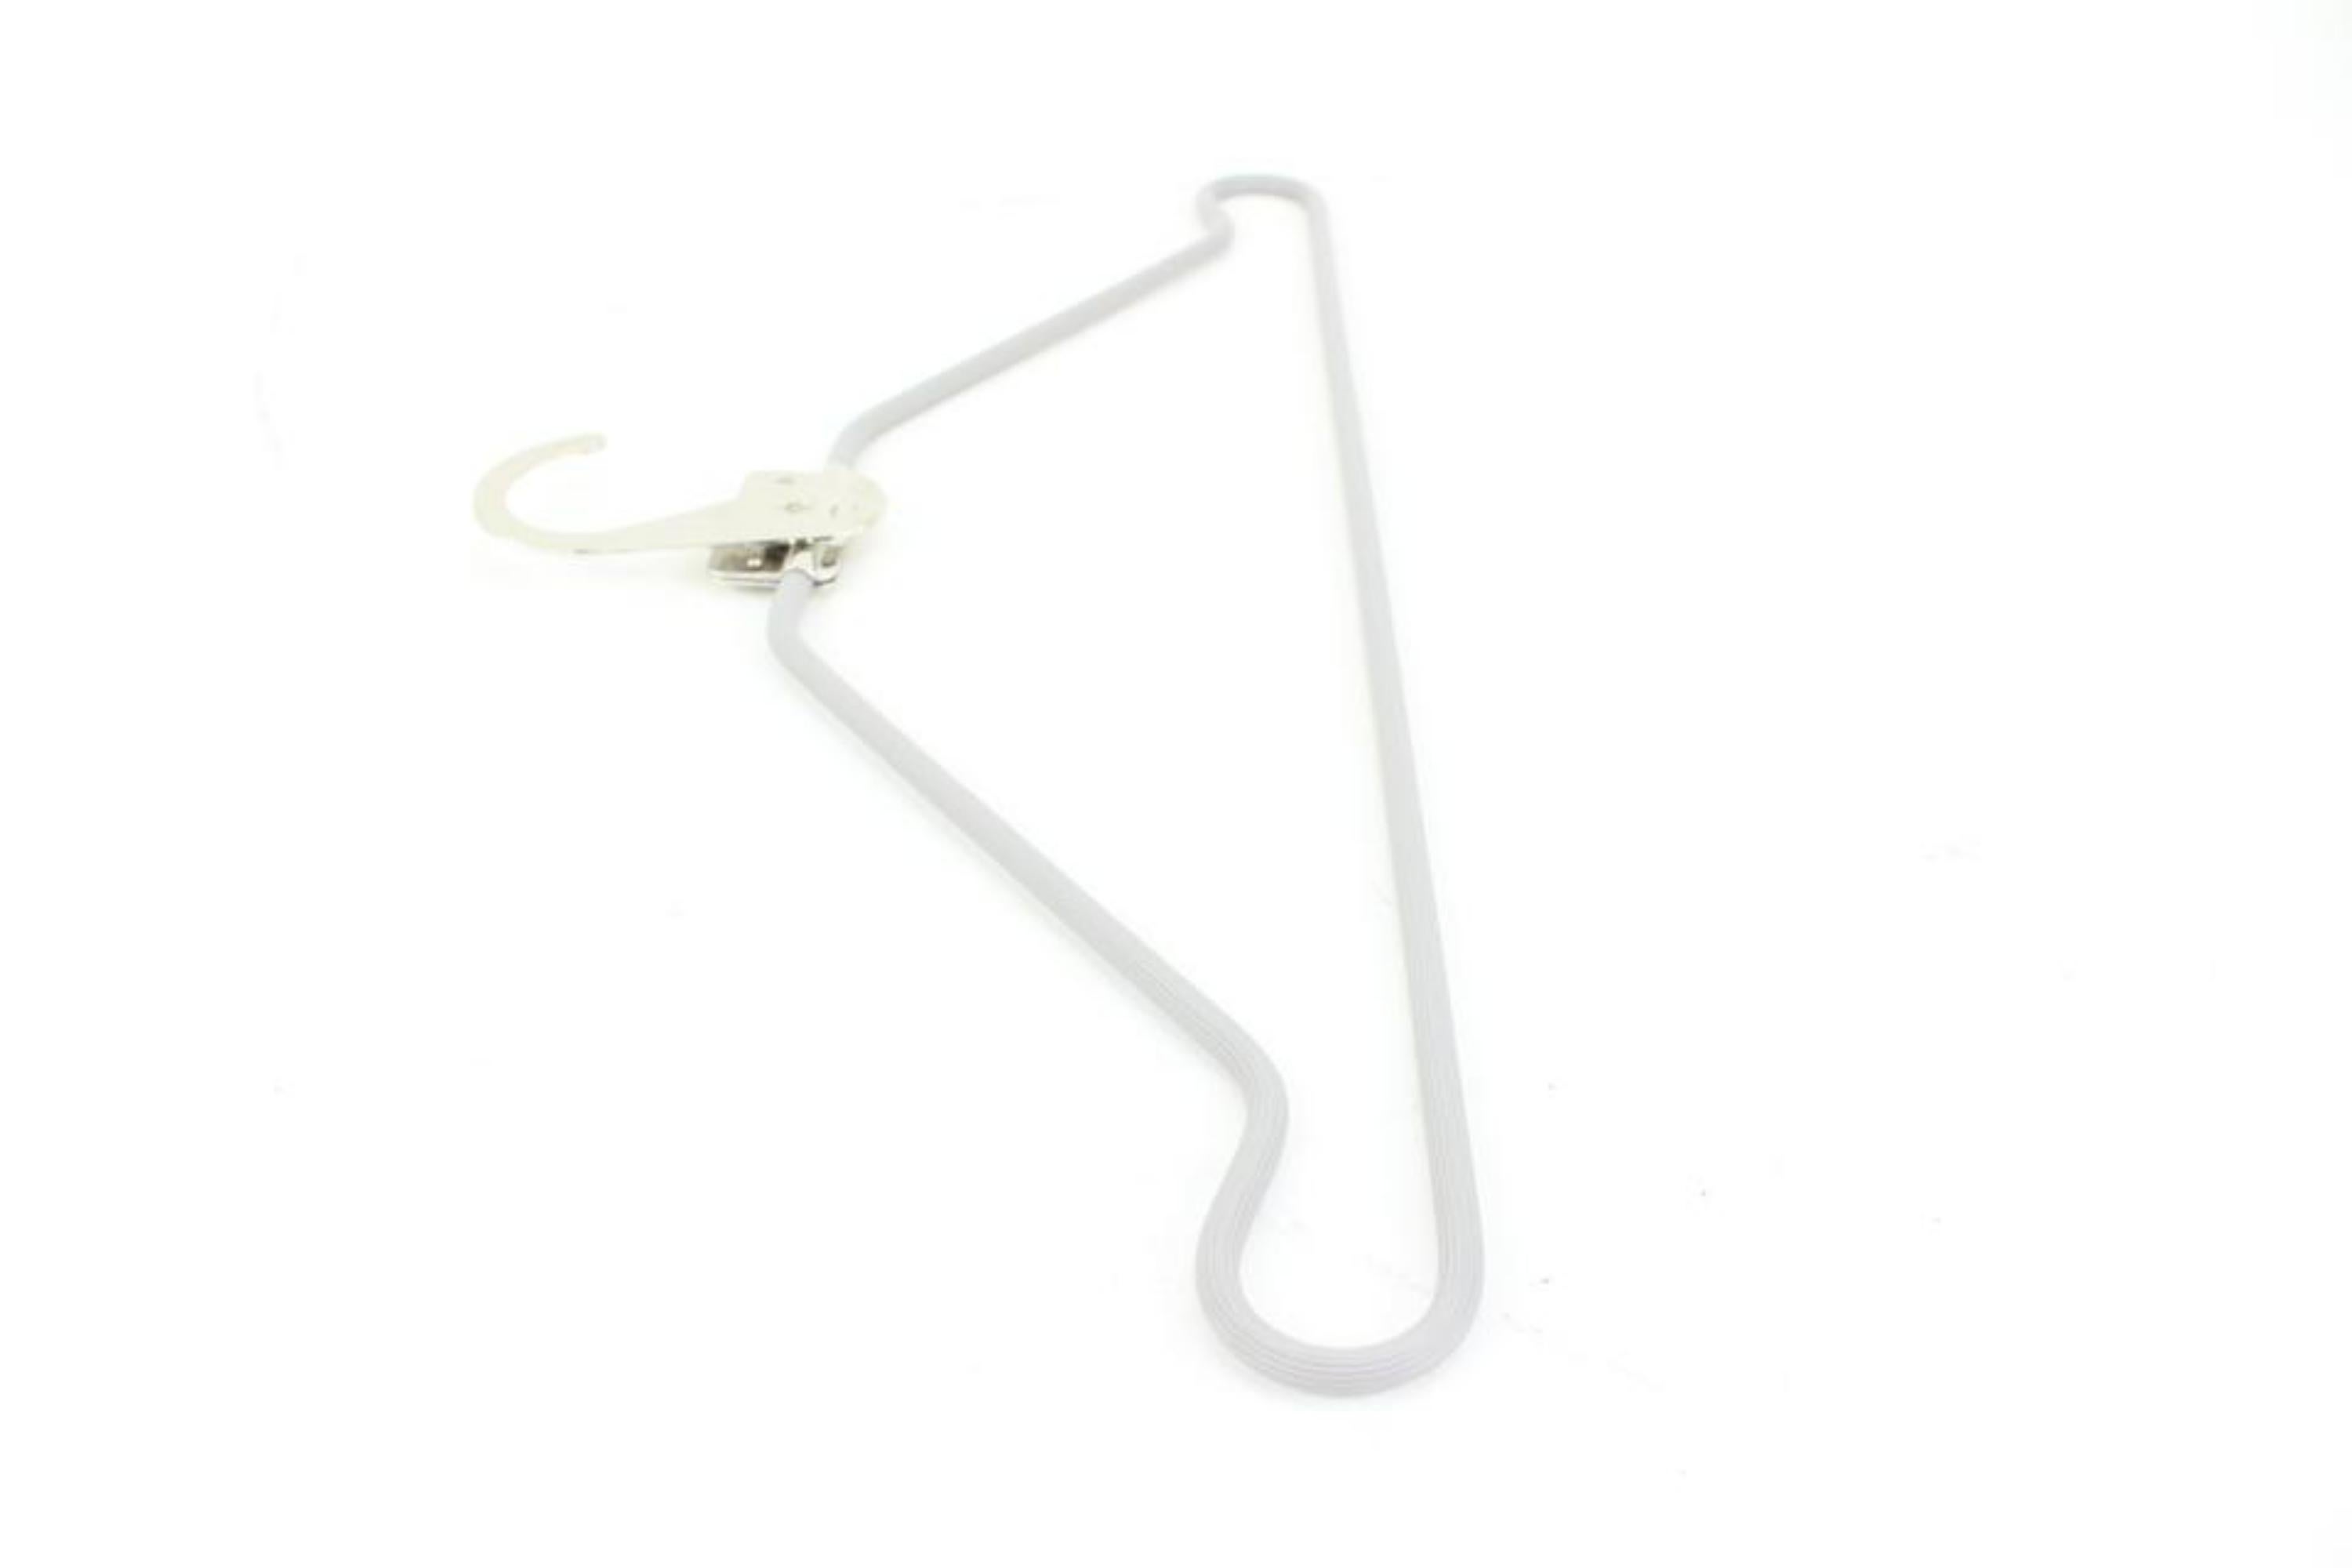 Louis Vuitton Grey x Silver Retractable Hanger 48lk52 In Good Condition For Sale In Dix hills, NY